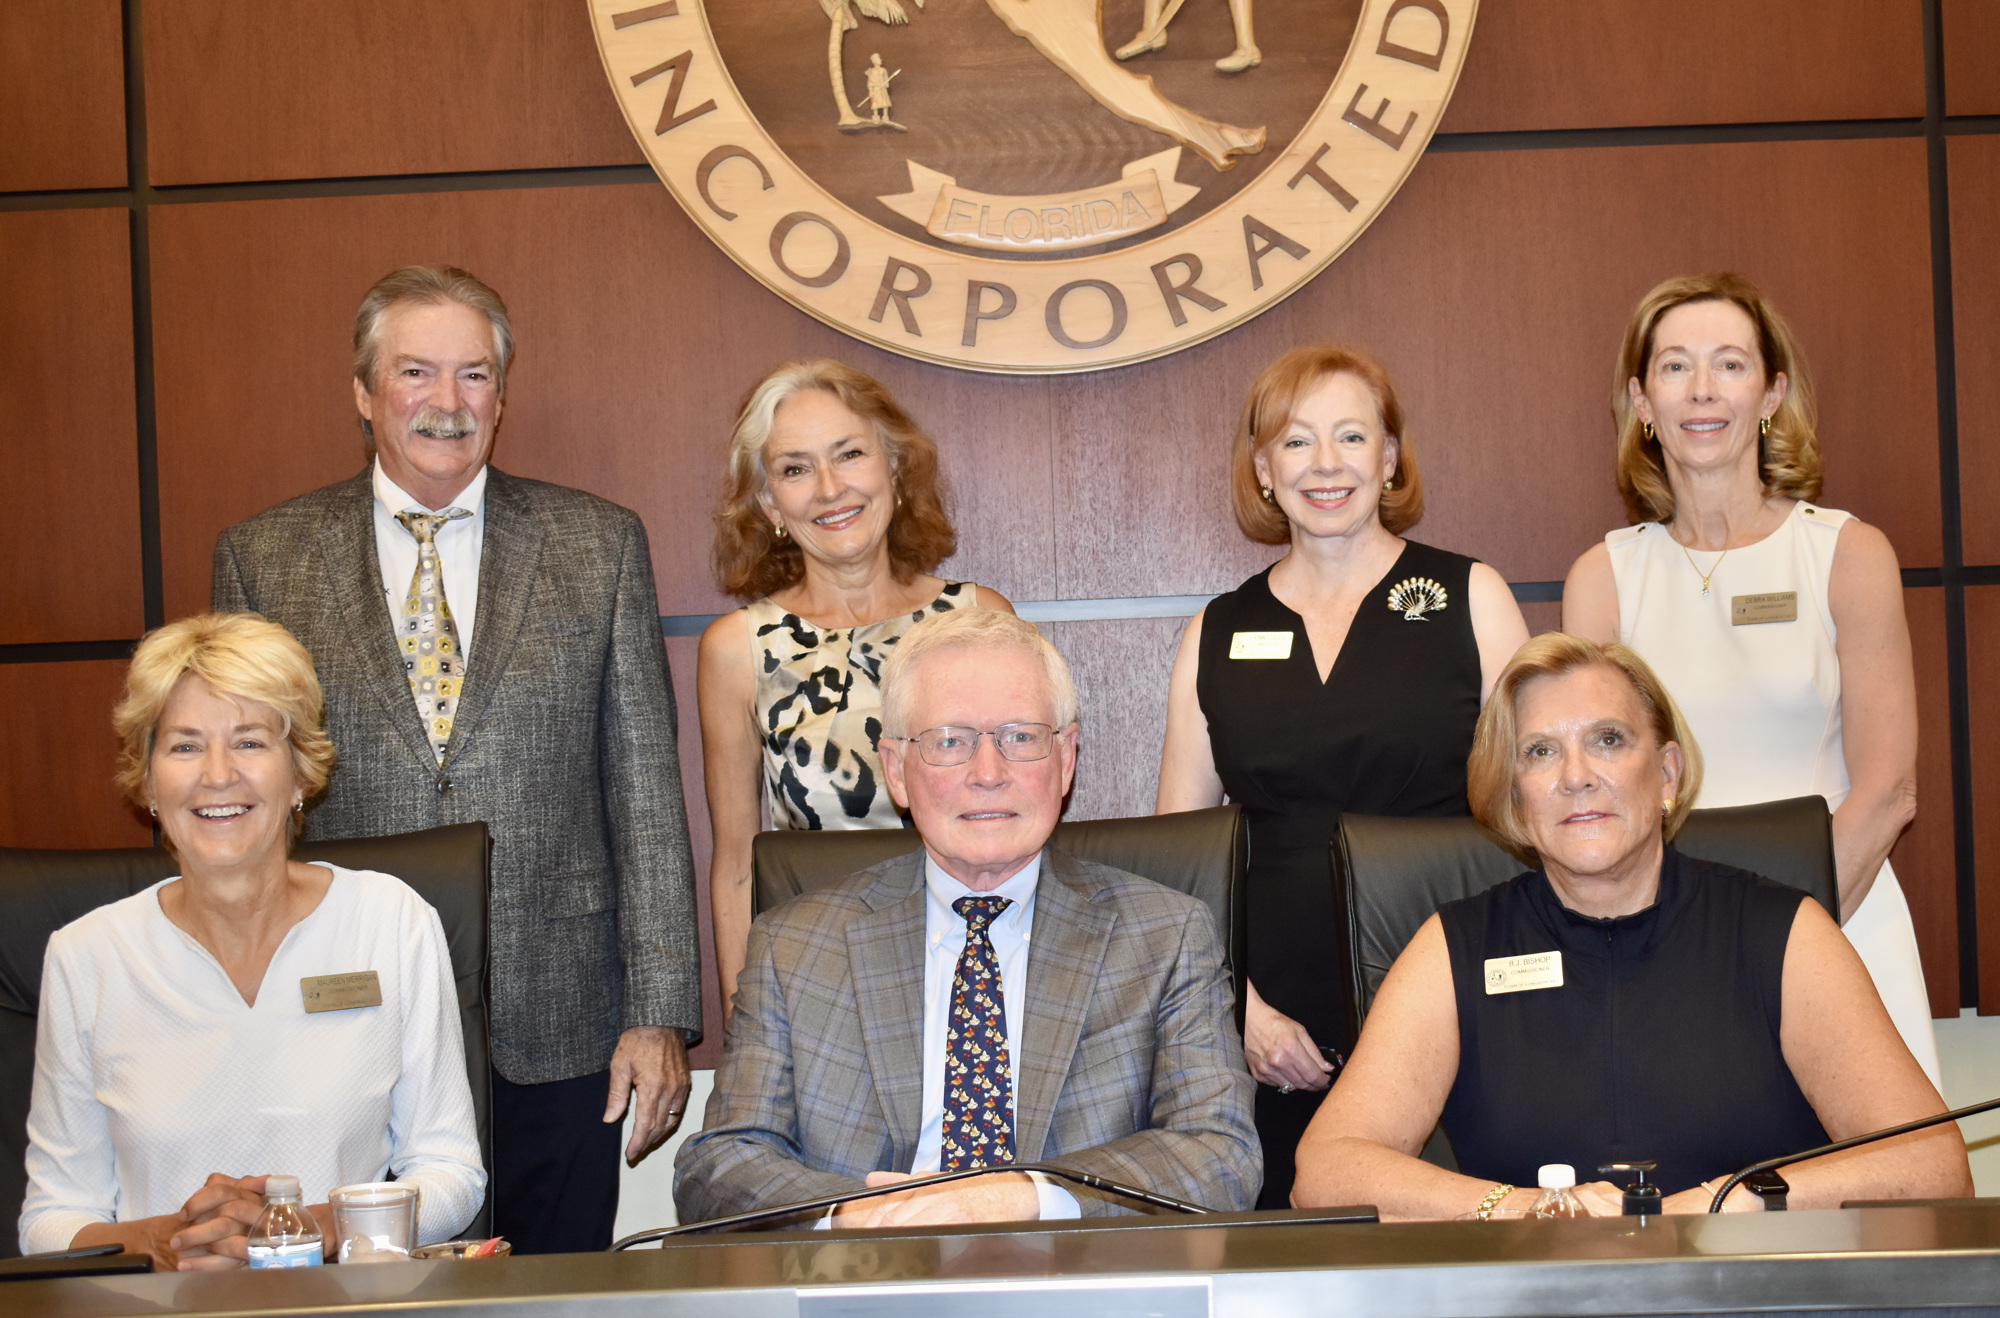 The town commission: (back row) Mike Haycock, Sherry Dominick, Penny Gold, Debra Williams (front row) Maureen Merrigan, Ken Schneier and BJ Bishop.